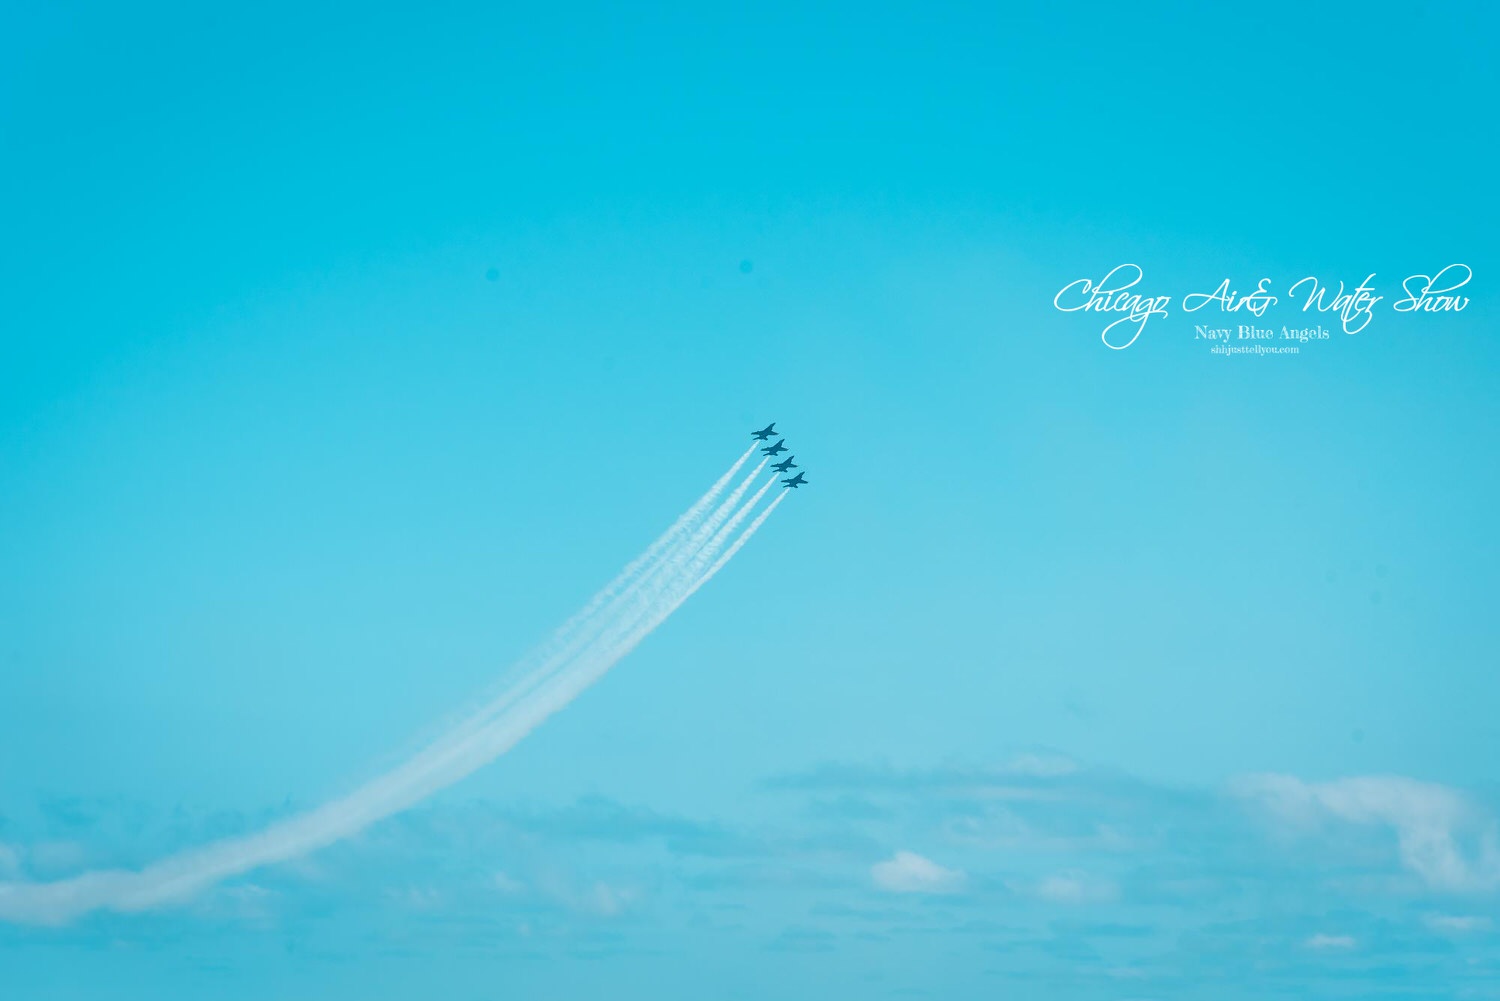 Chicago Navy Blue Angels, Air& Water Show芝加哥航展